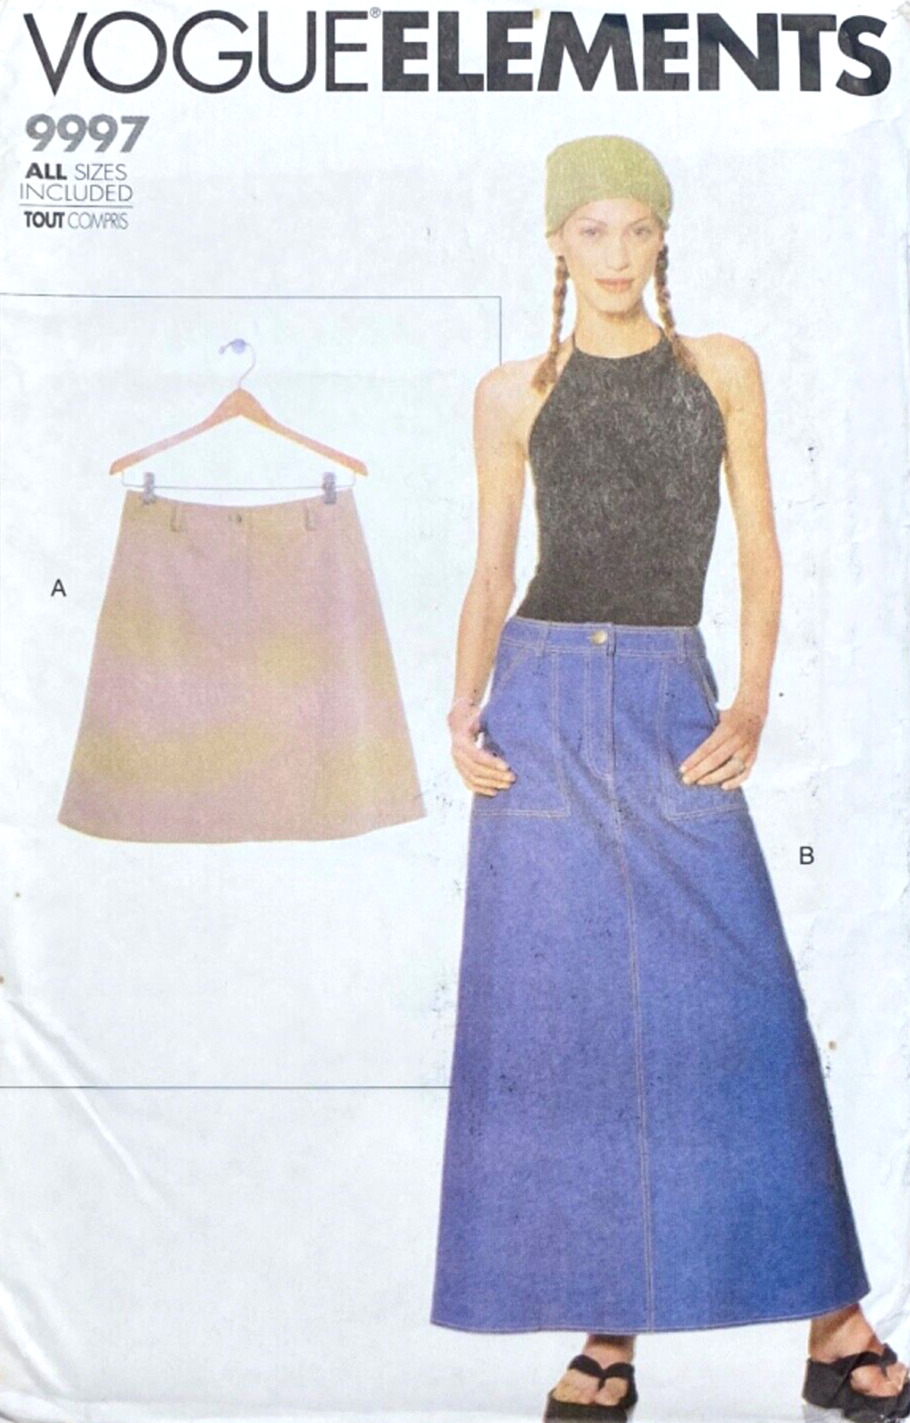 90s VOGUE ELEMENTS 9997 ALL SIZES 6-22 MISSES SKIRT UC/FF